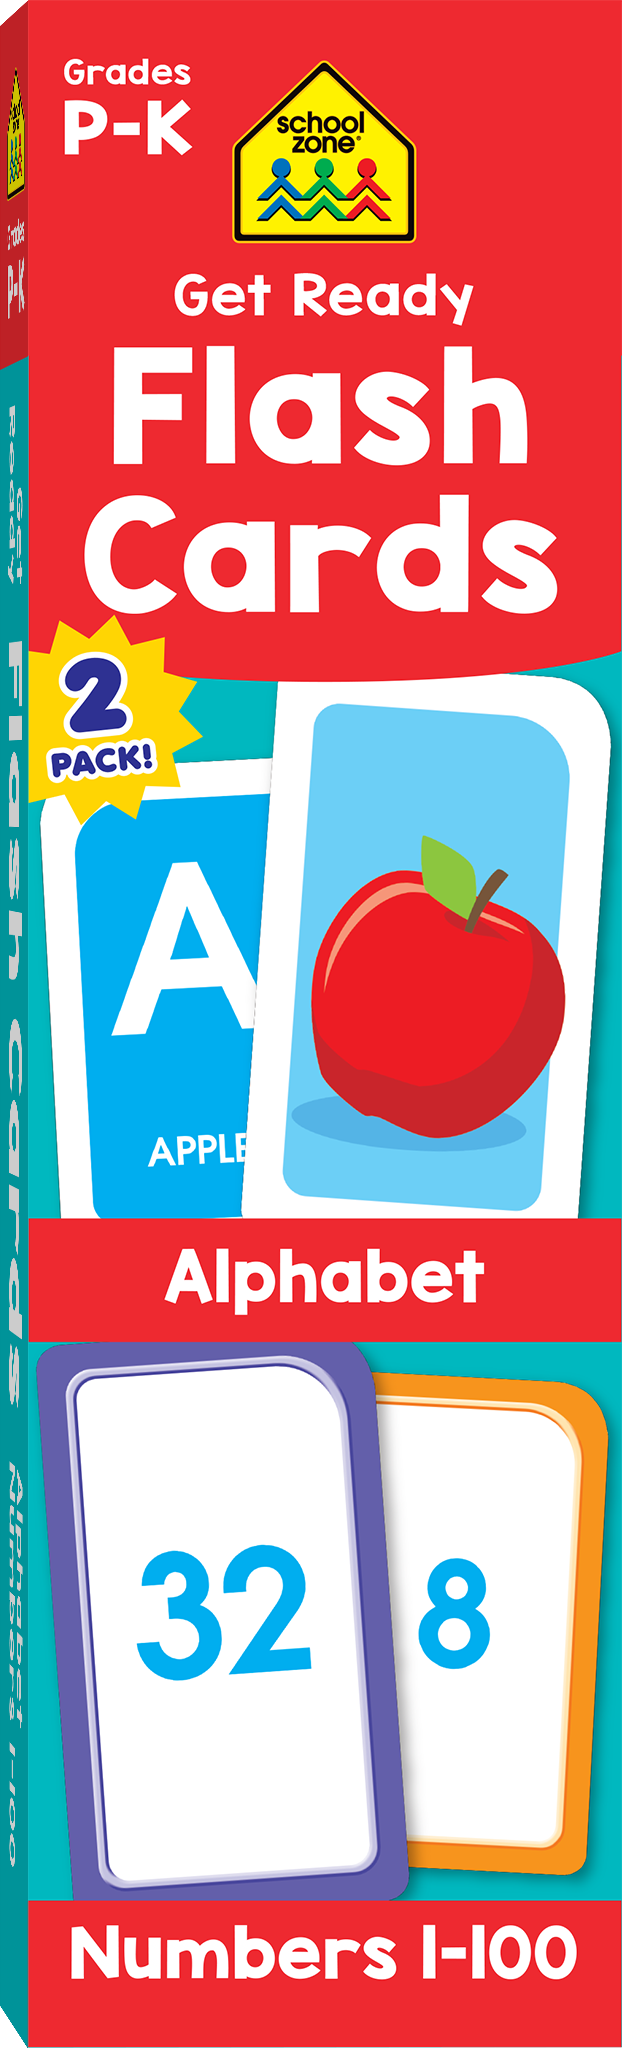 This Get Ready Flash Cards Alphabet & Numbers 2-Pack Grades P-K  will help build letter and number skills!